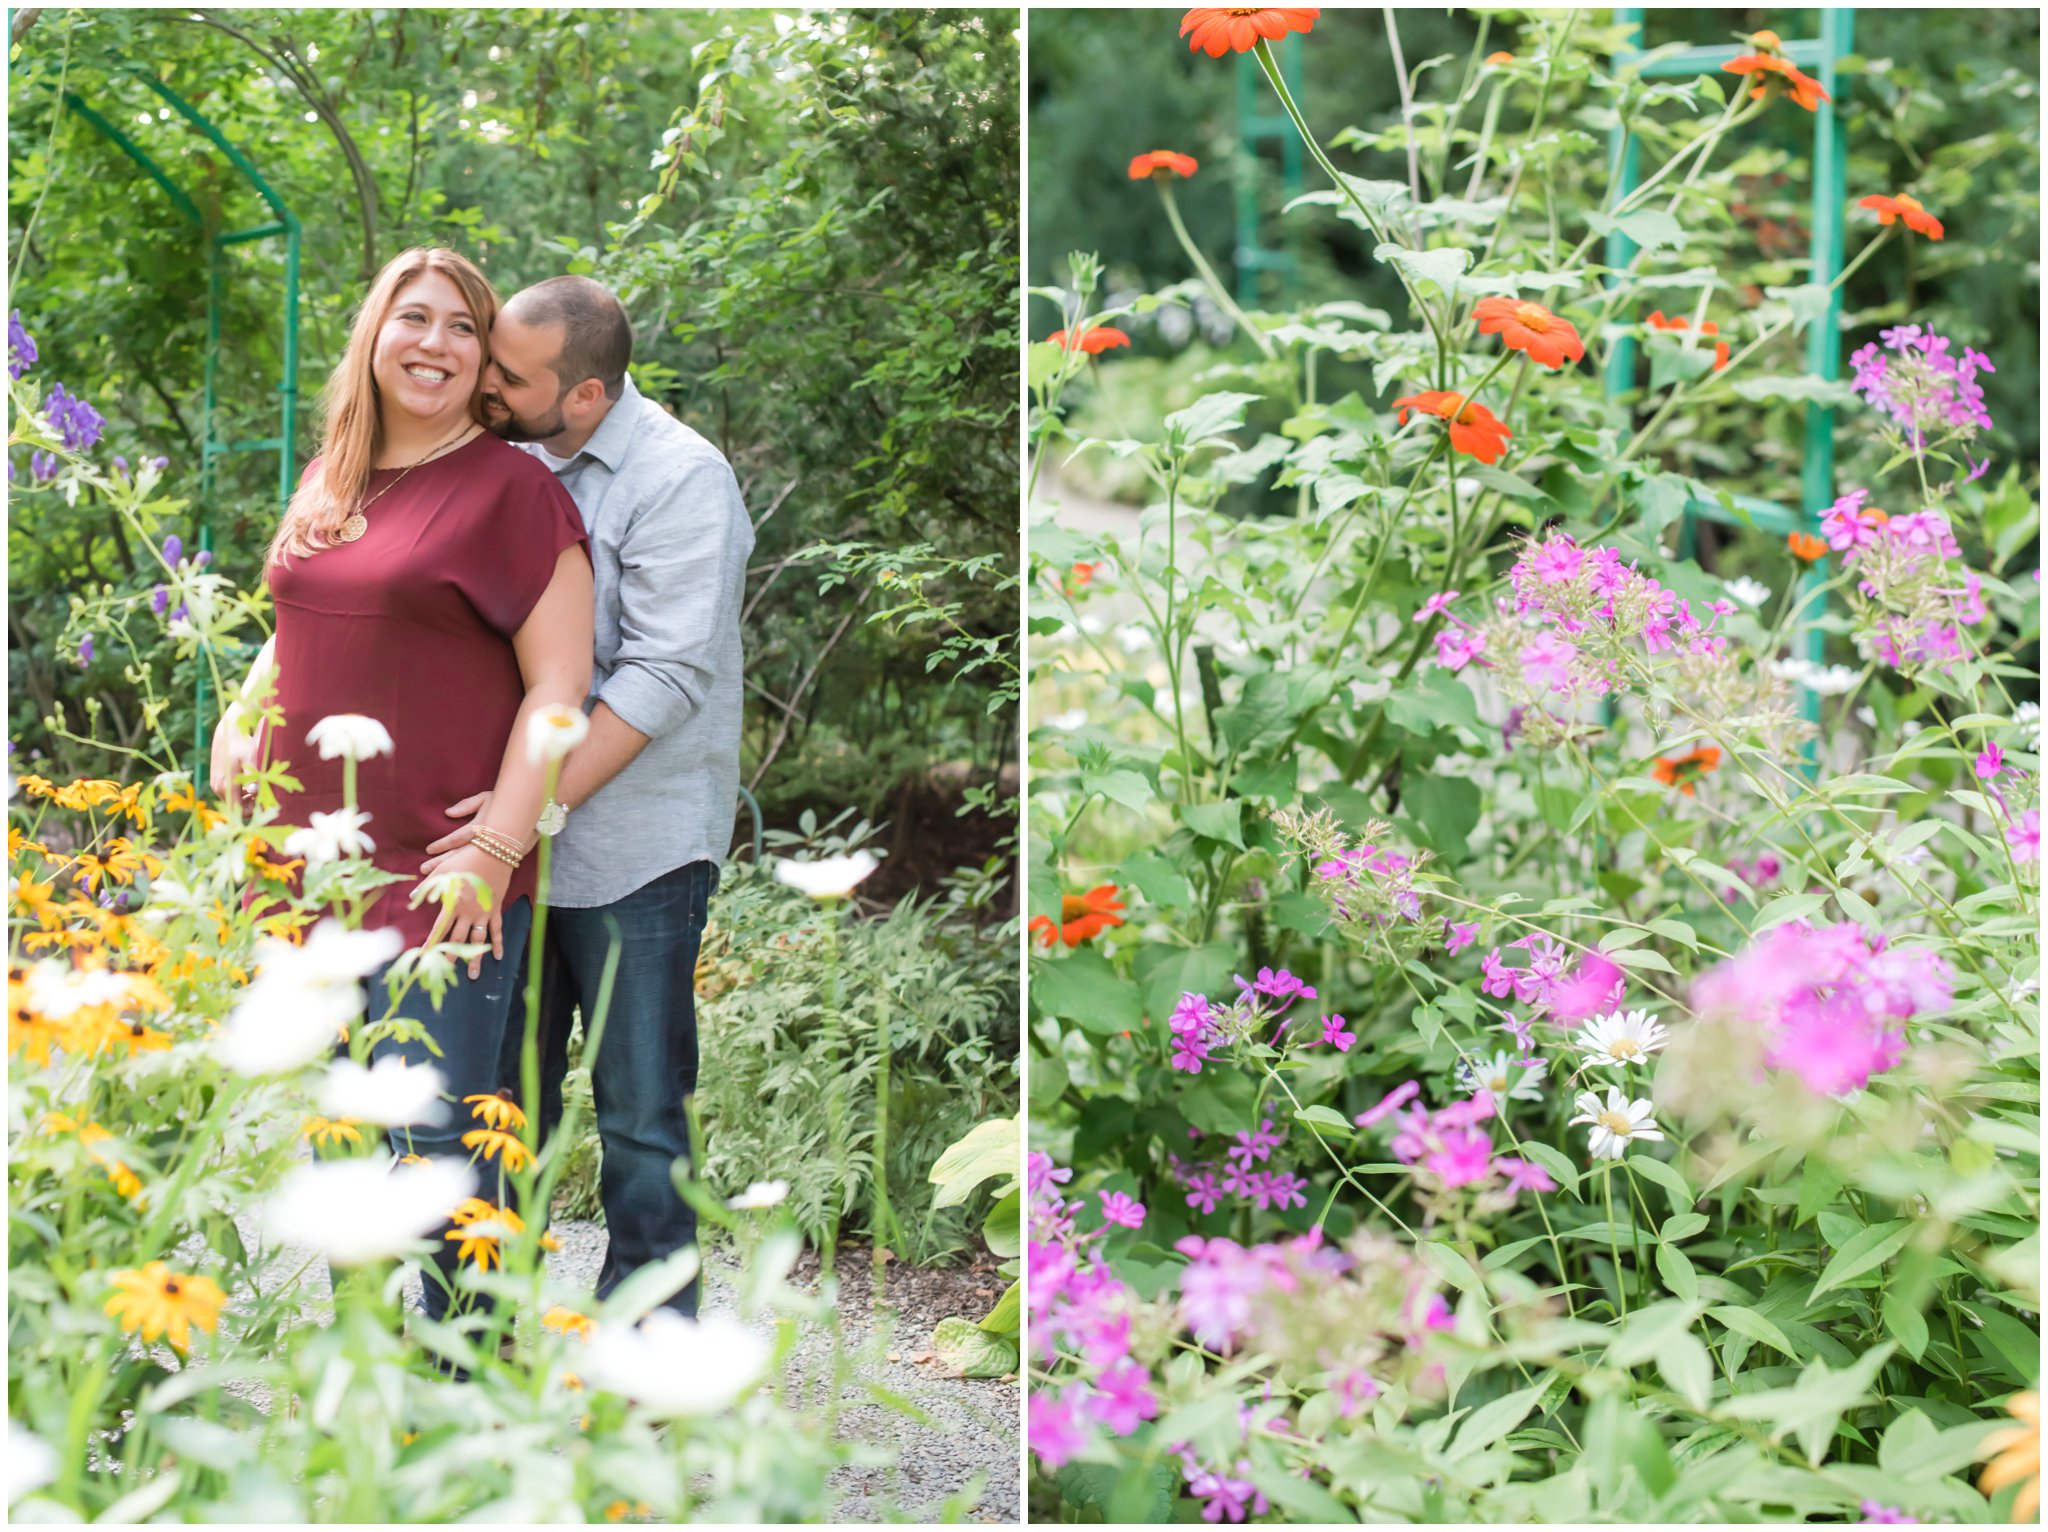 Laura Lee Photography_ Best of 2015 Engagements_0010